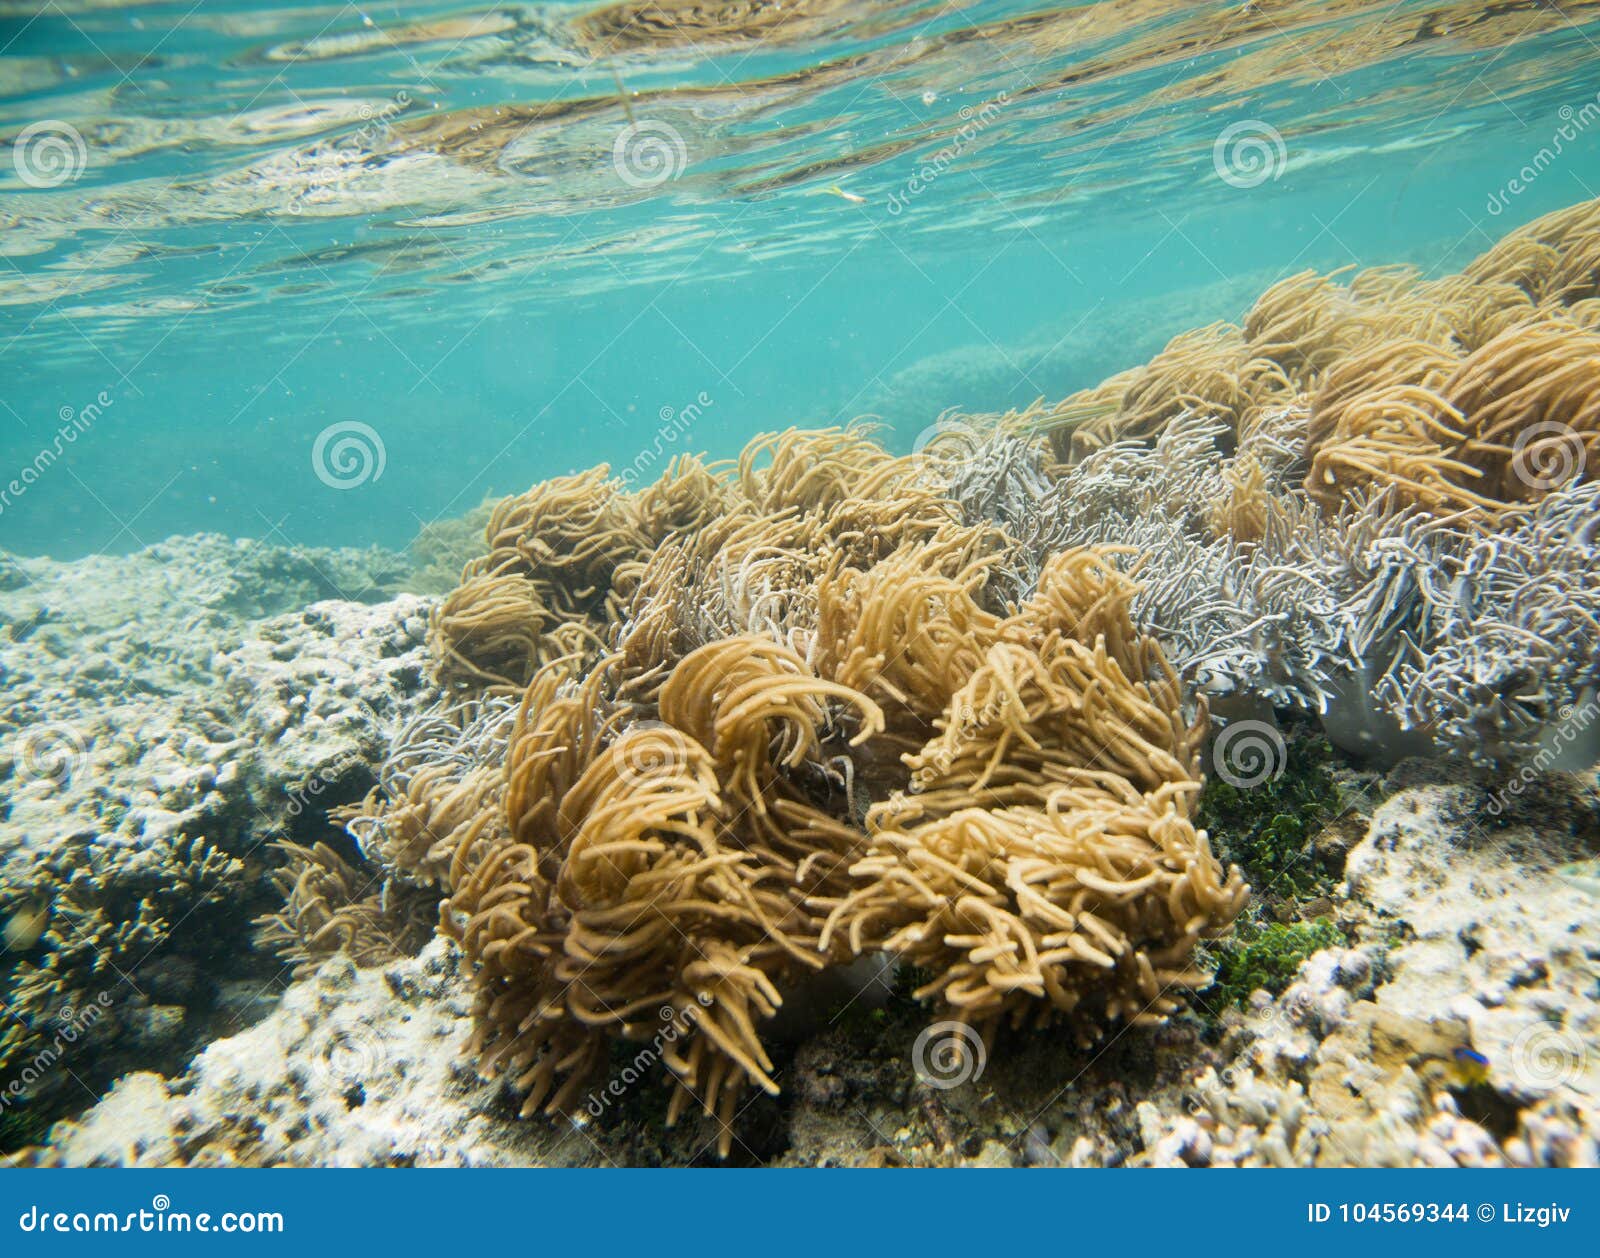 Undersea Great Astrolabe Coral Garden Stock Photo Image Of Life